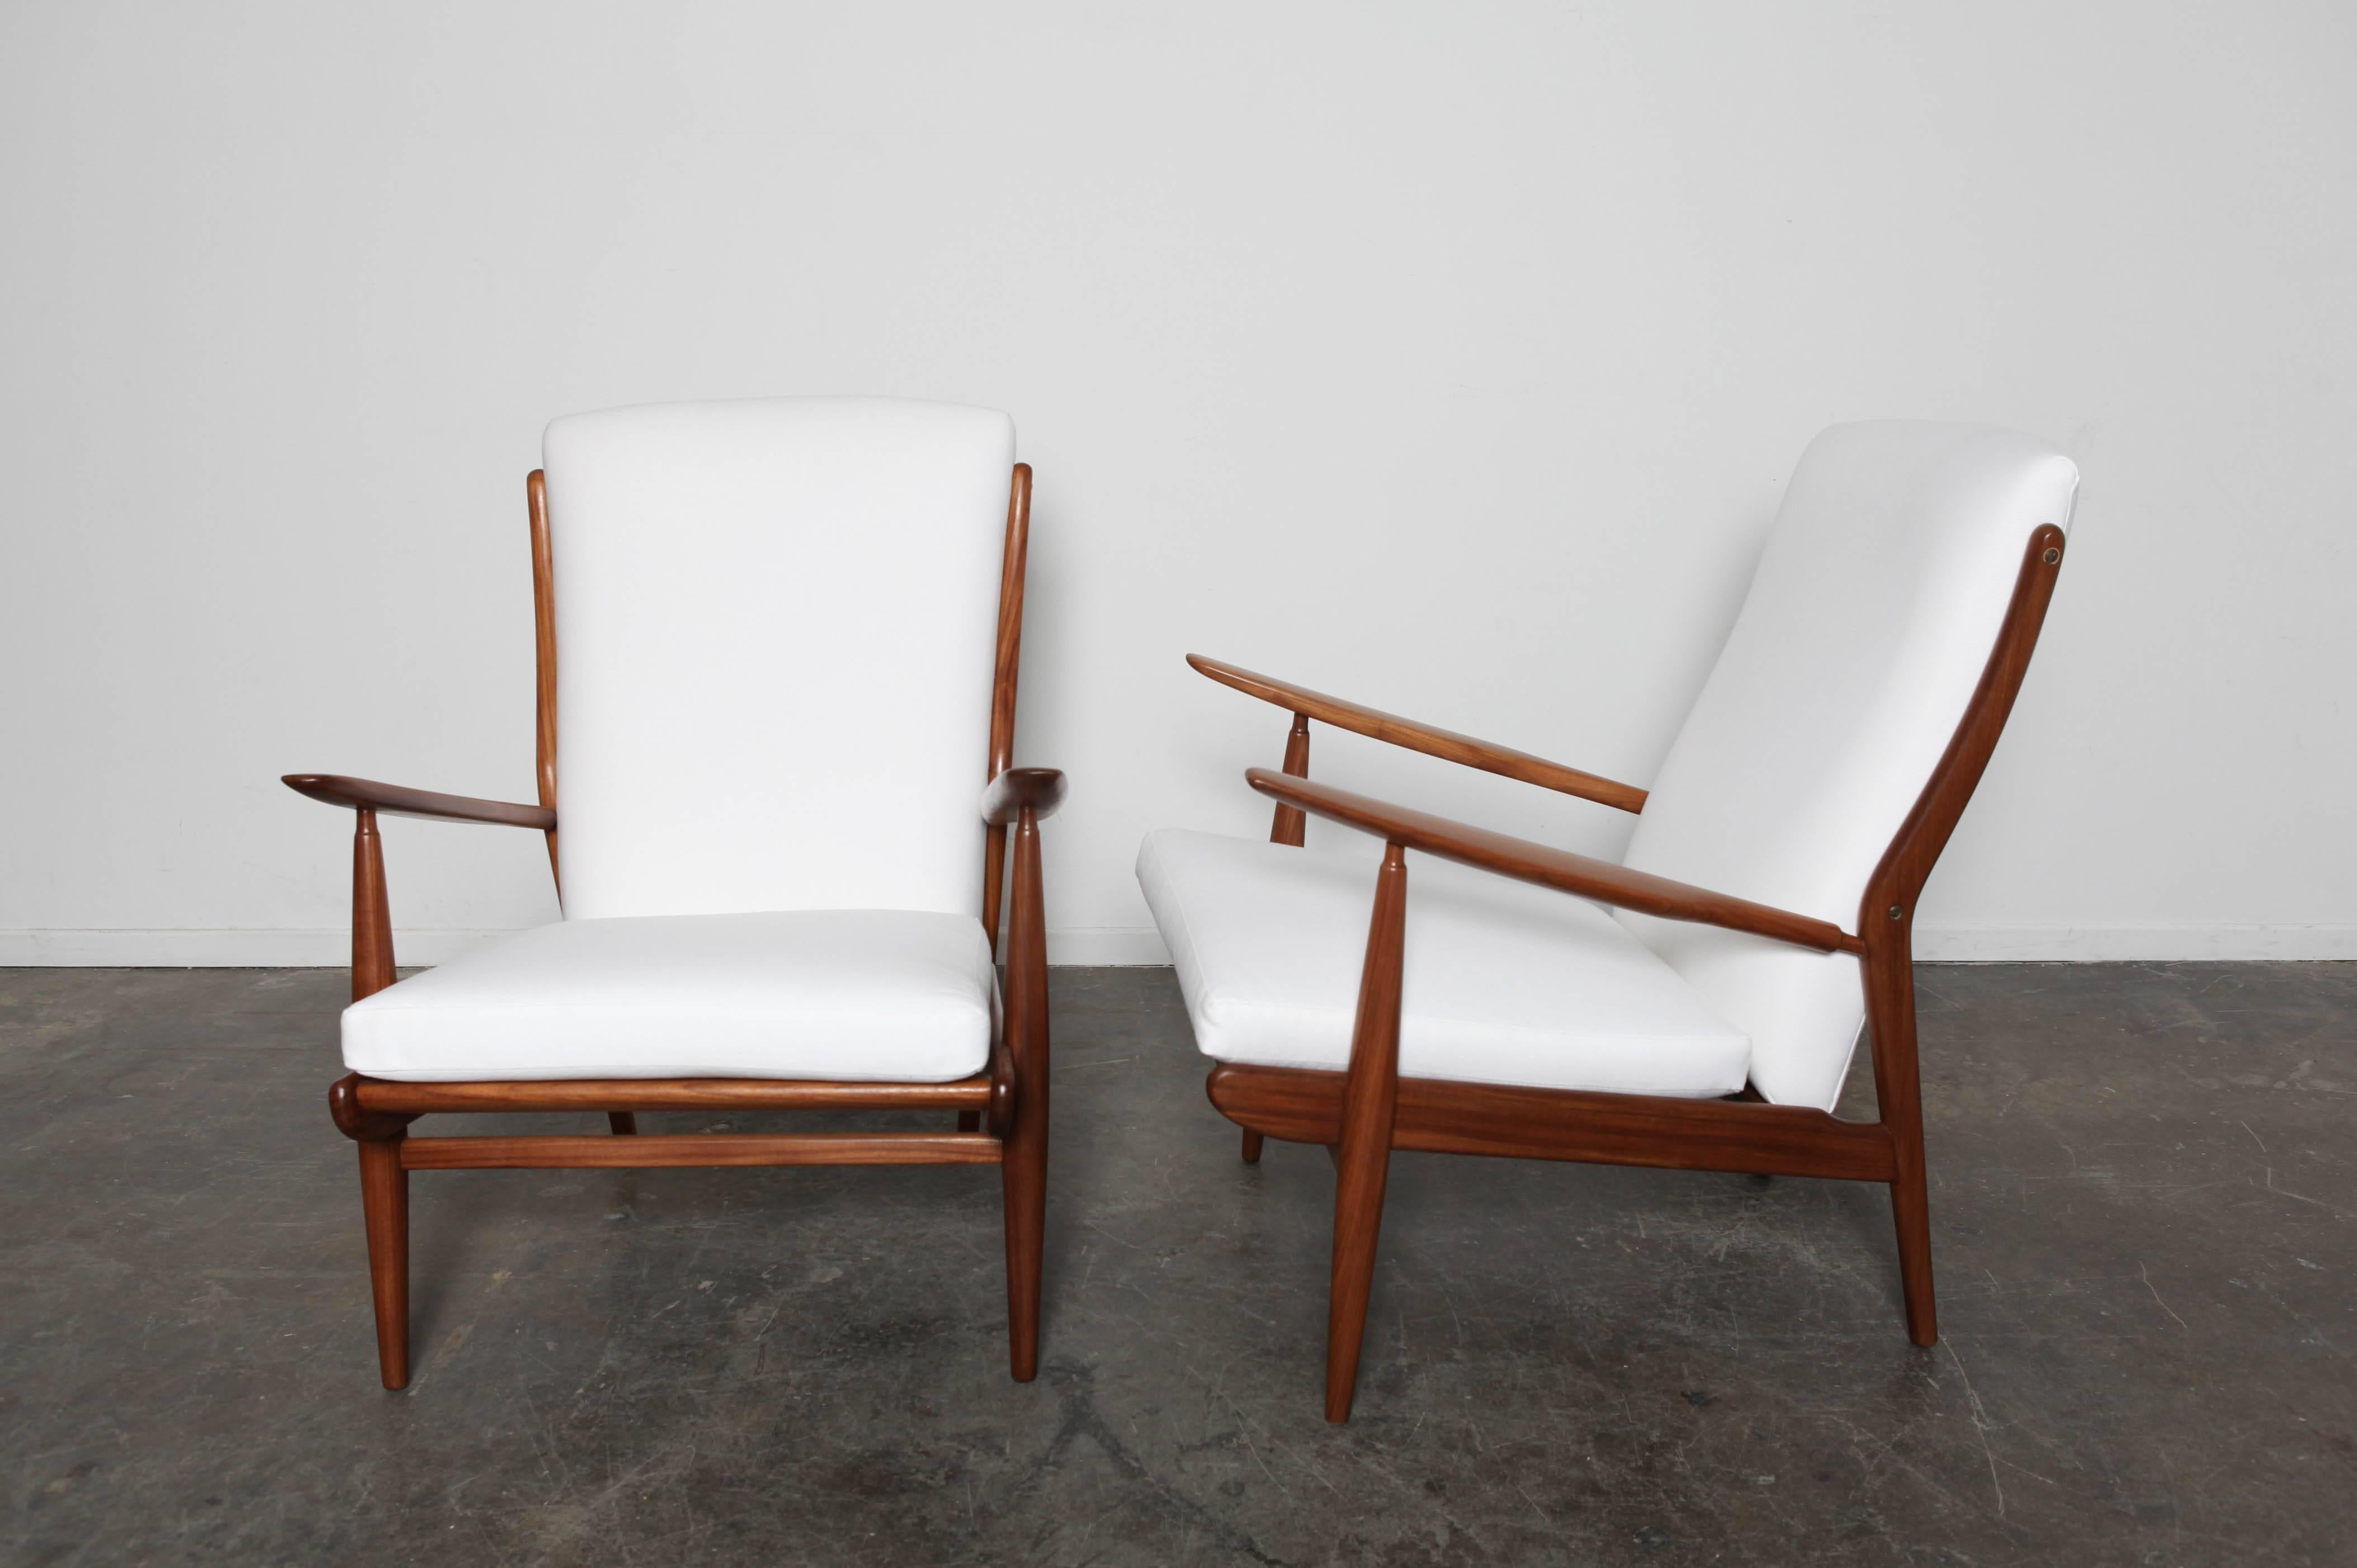 Newly refinished and upholstered Parker Knoll lounge chairs, a pair, with solid beech frames, from England. The chairs have been fully stripped sanded and newly refinished in lacquer and have been newly upholstered in an off-white fabric.